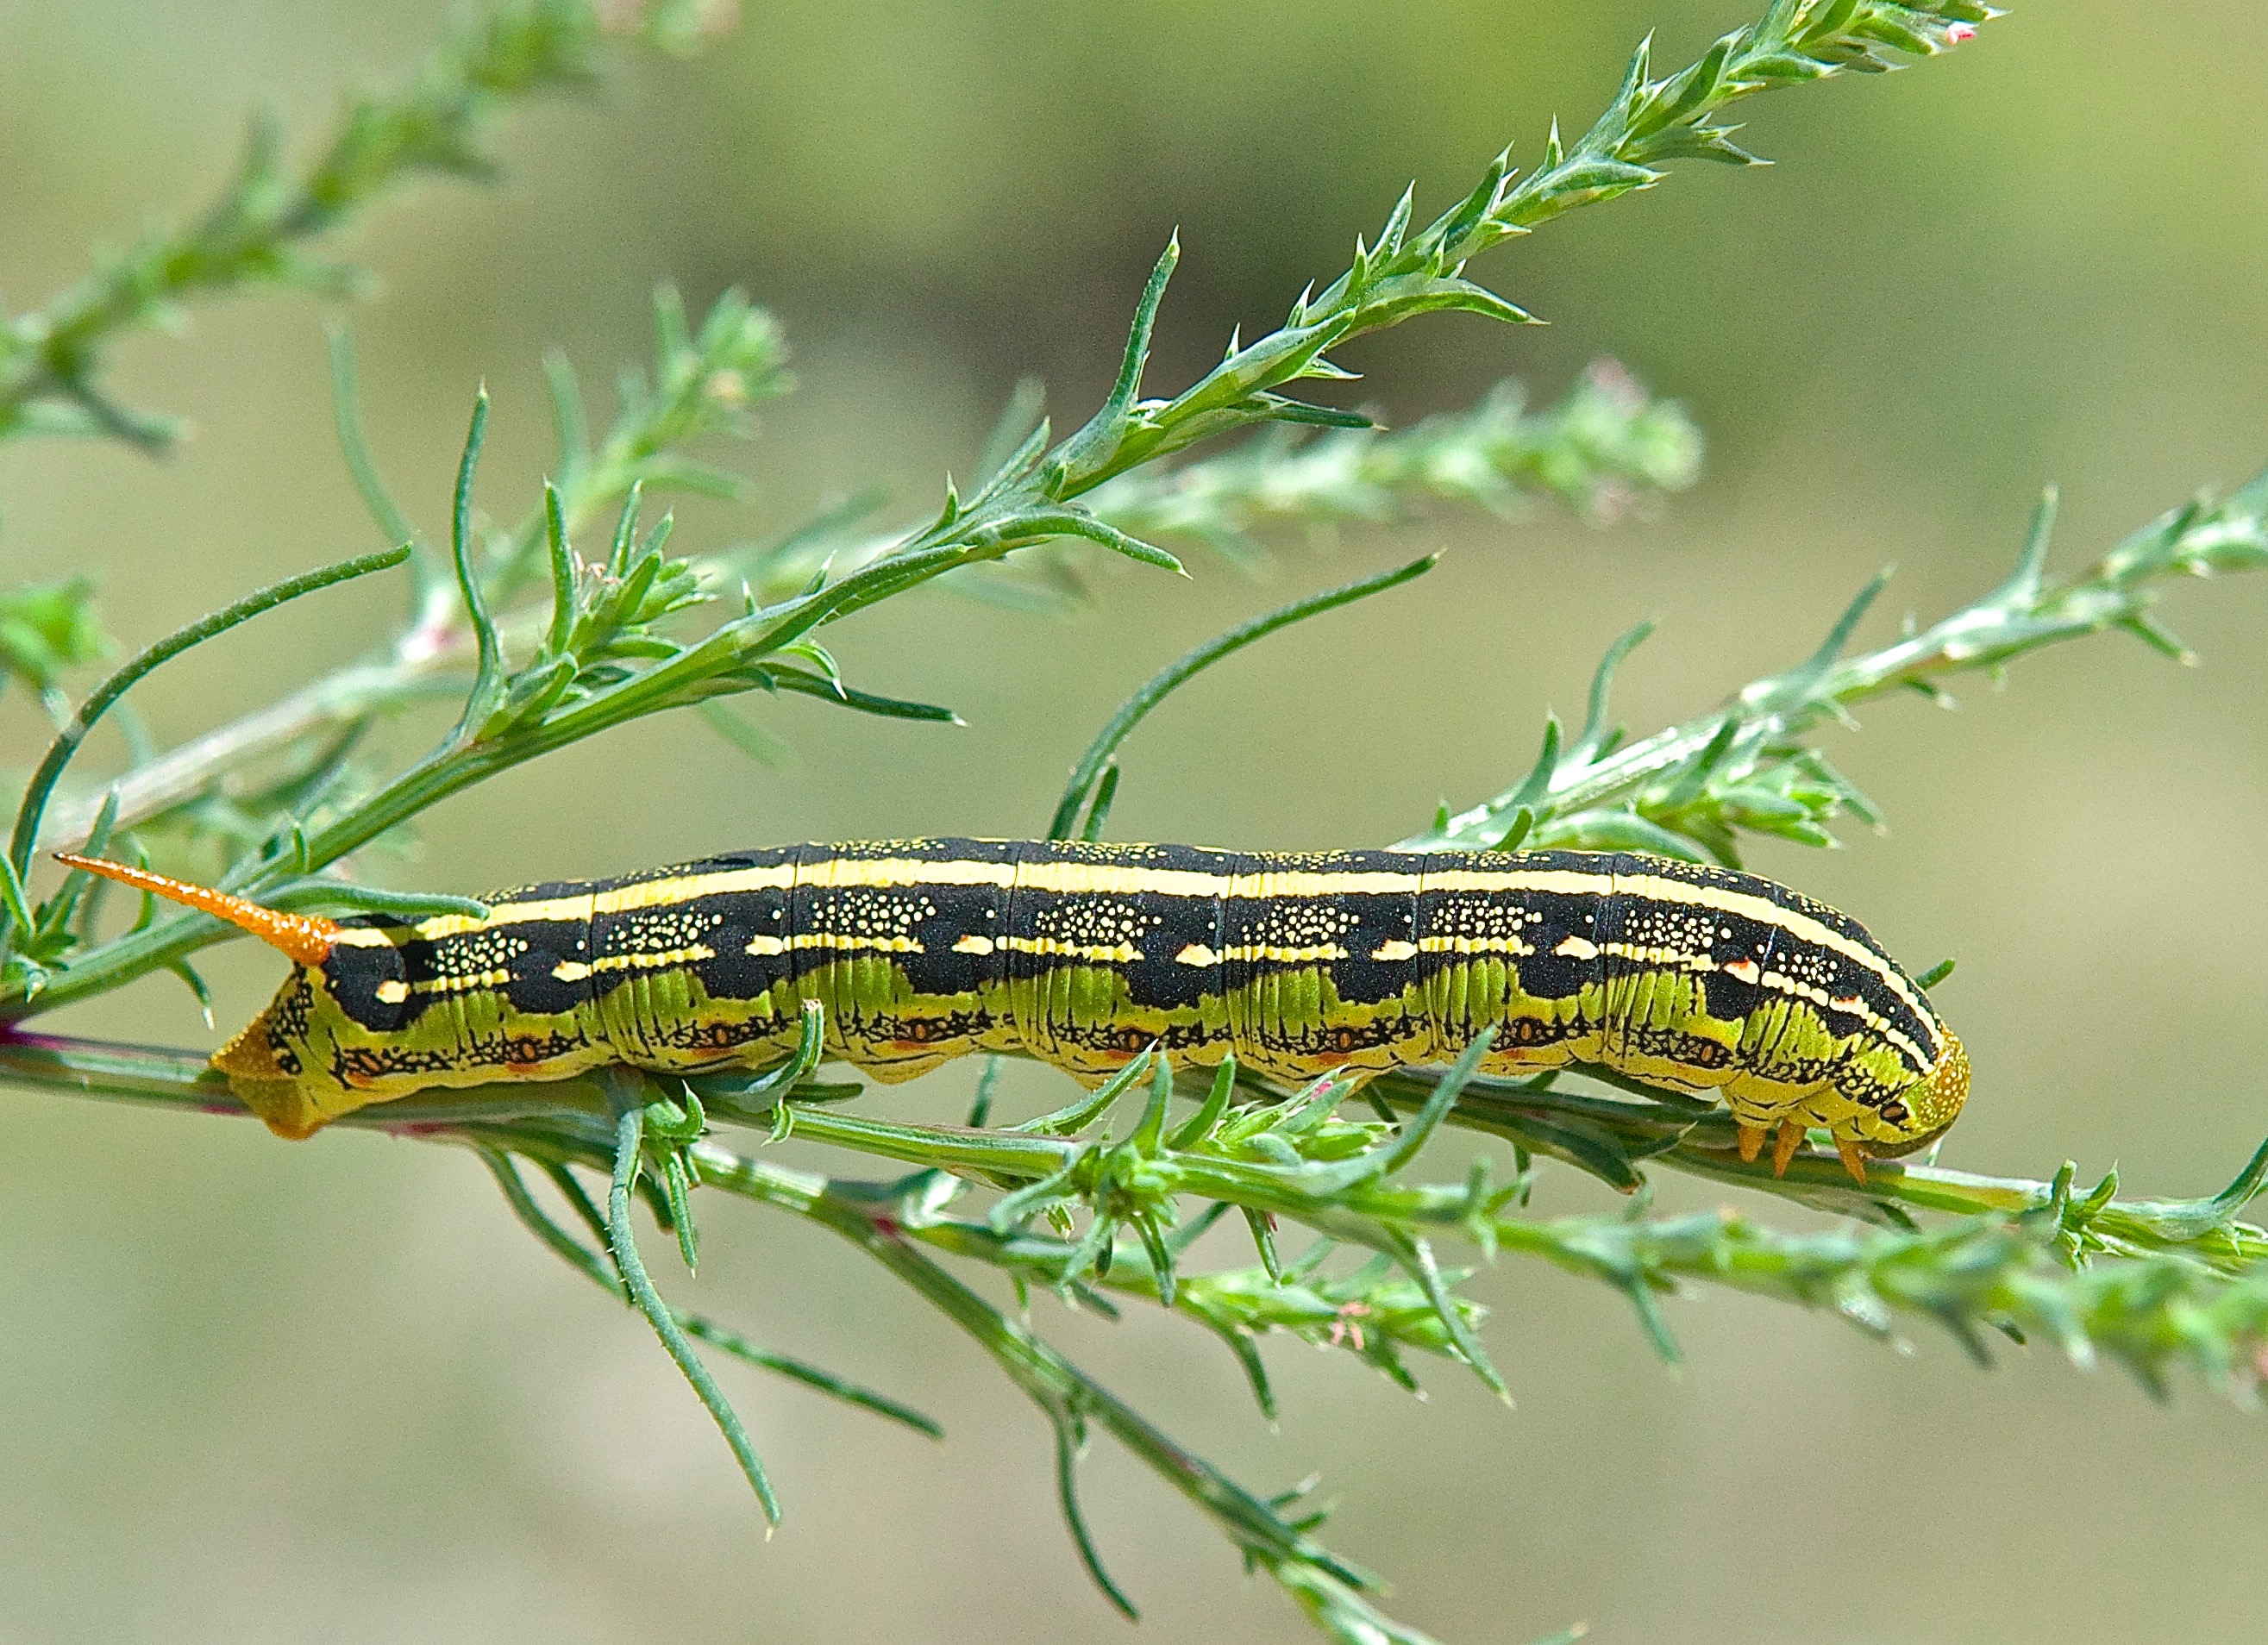 White-lined Sphinx Moth (Hyles lineata) (Caterpillar)